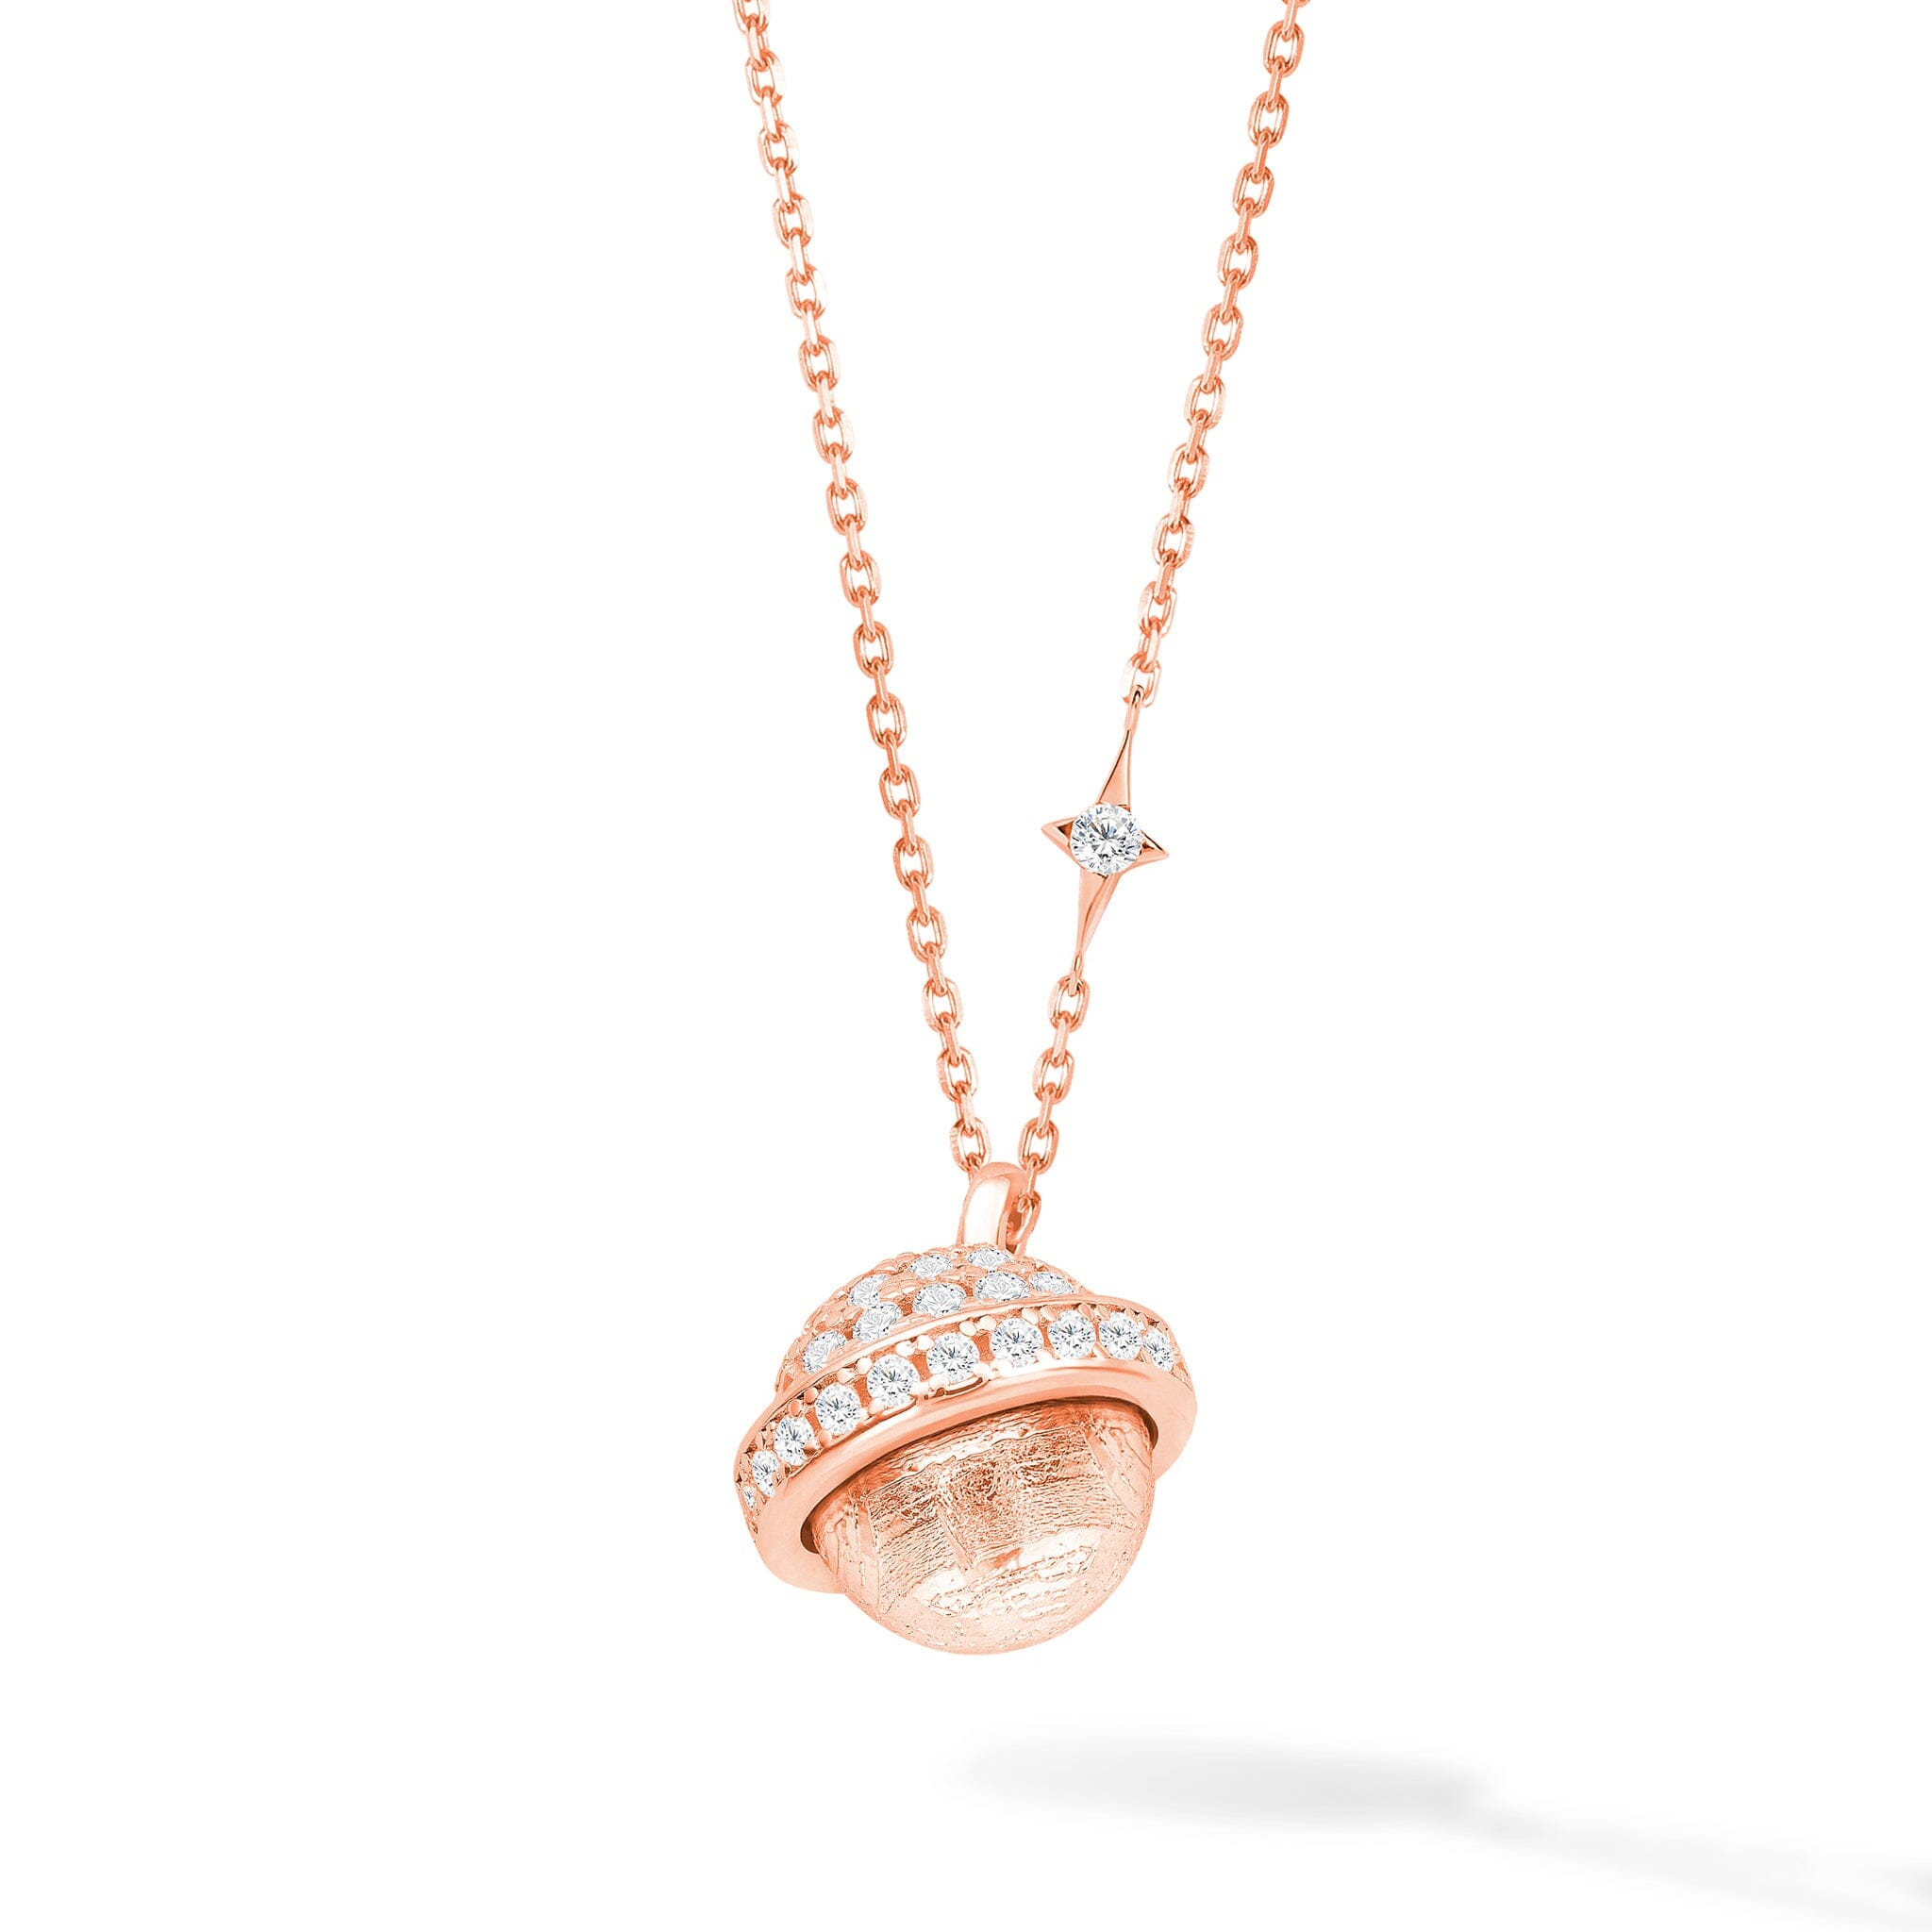 Women's Lunar Silver Necklace with Meteorite Necklaces WAA FASHION GROUP Rose Gold Adjustable 